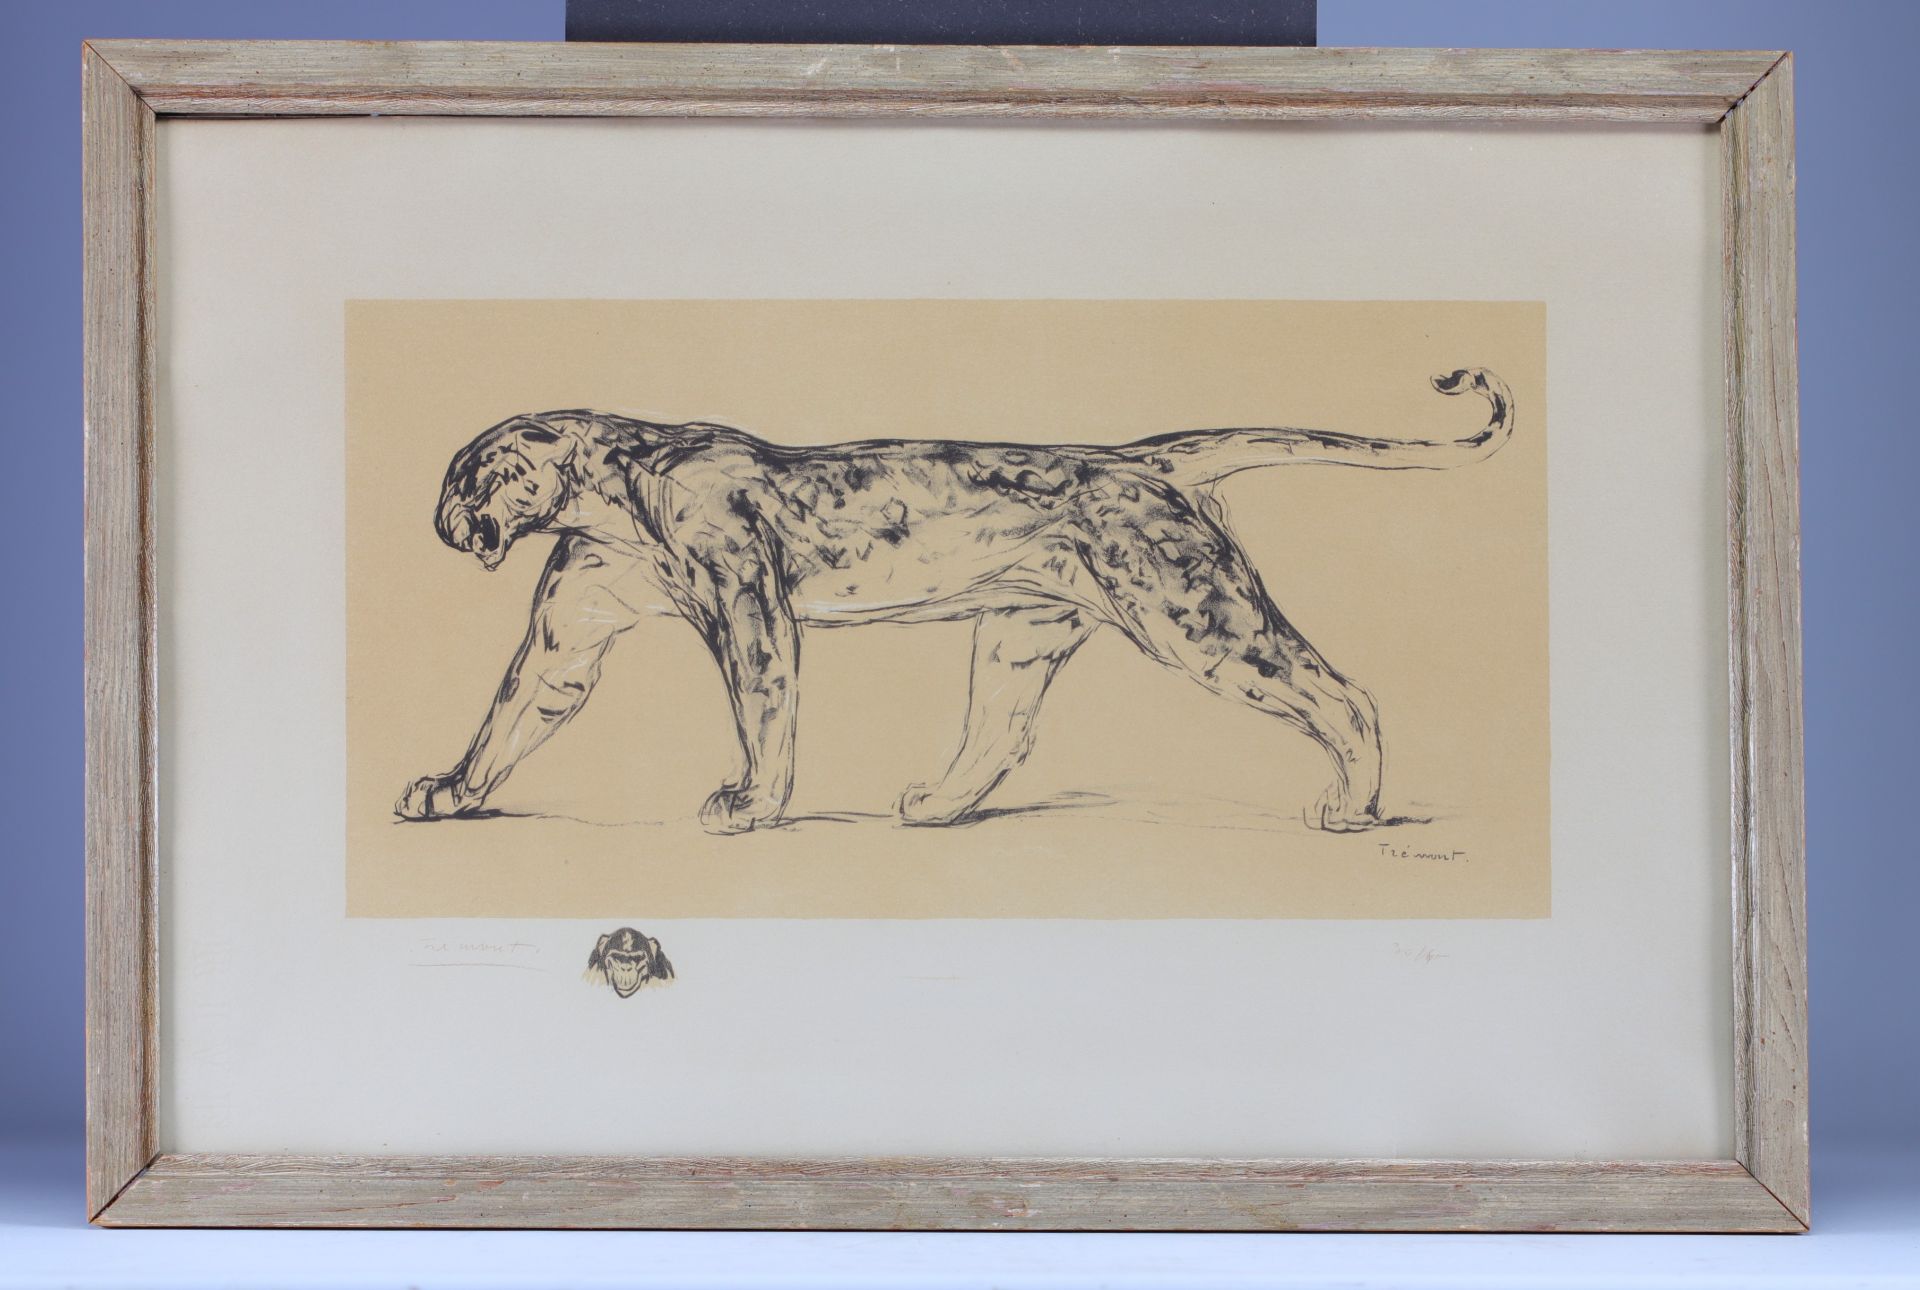 Auguste TREMONT (1892-1980) Lithograph "Panther" - Image 2 of 2